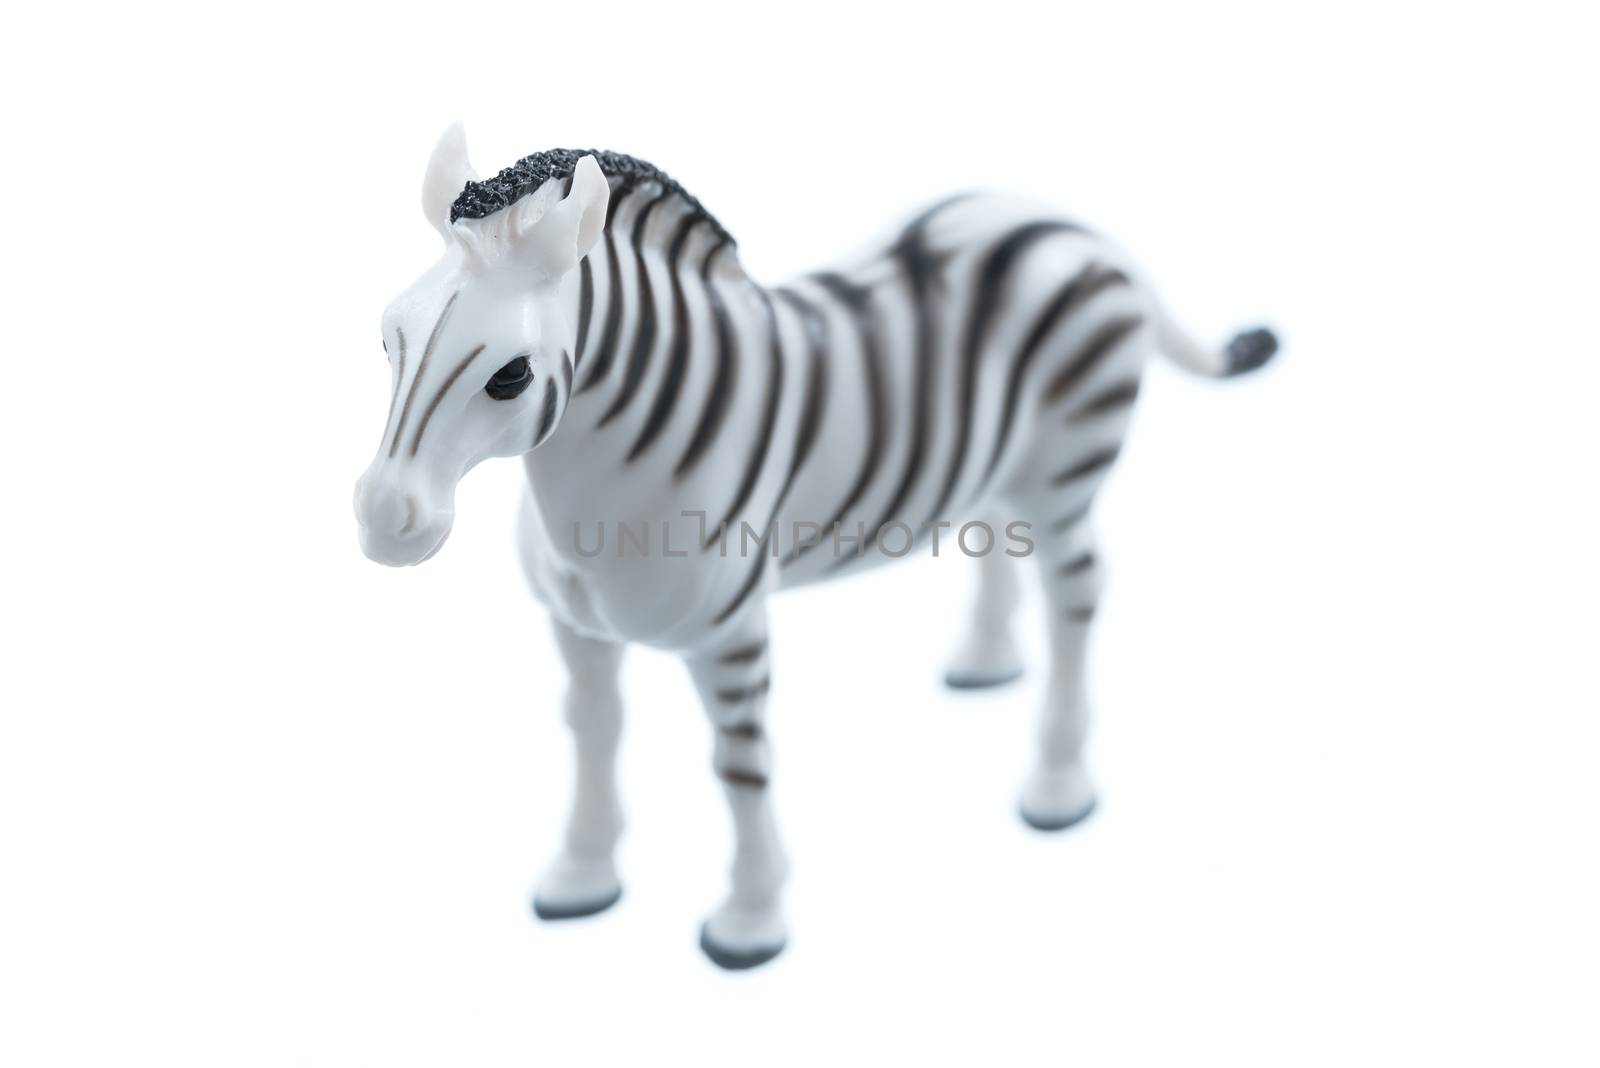 A small toy zebra isolated on a white background.